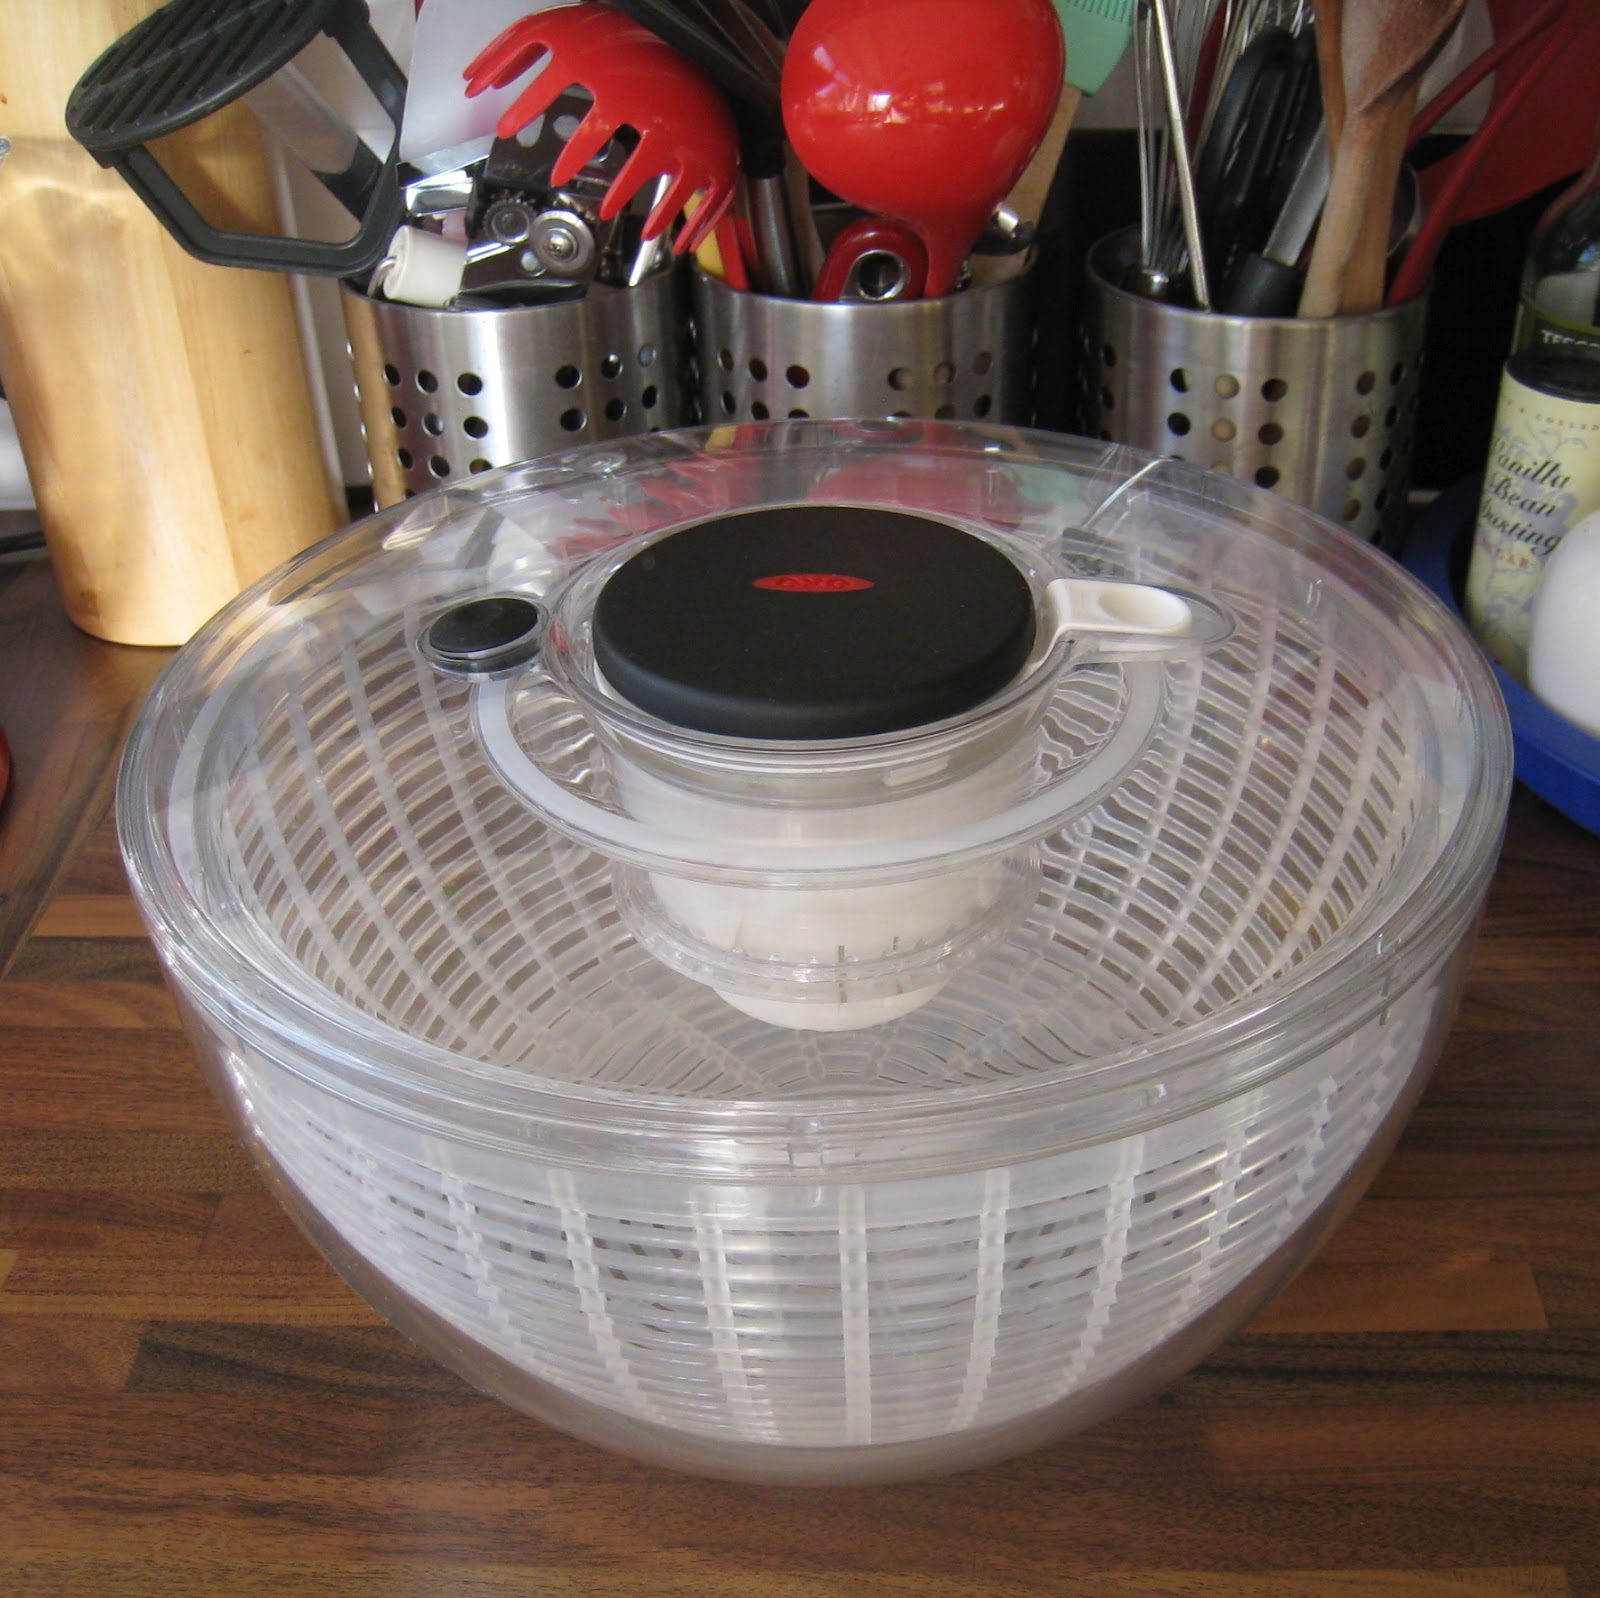 OXO Salad Spinners